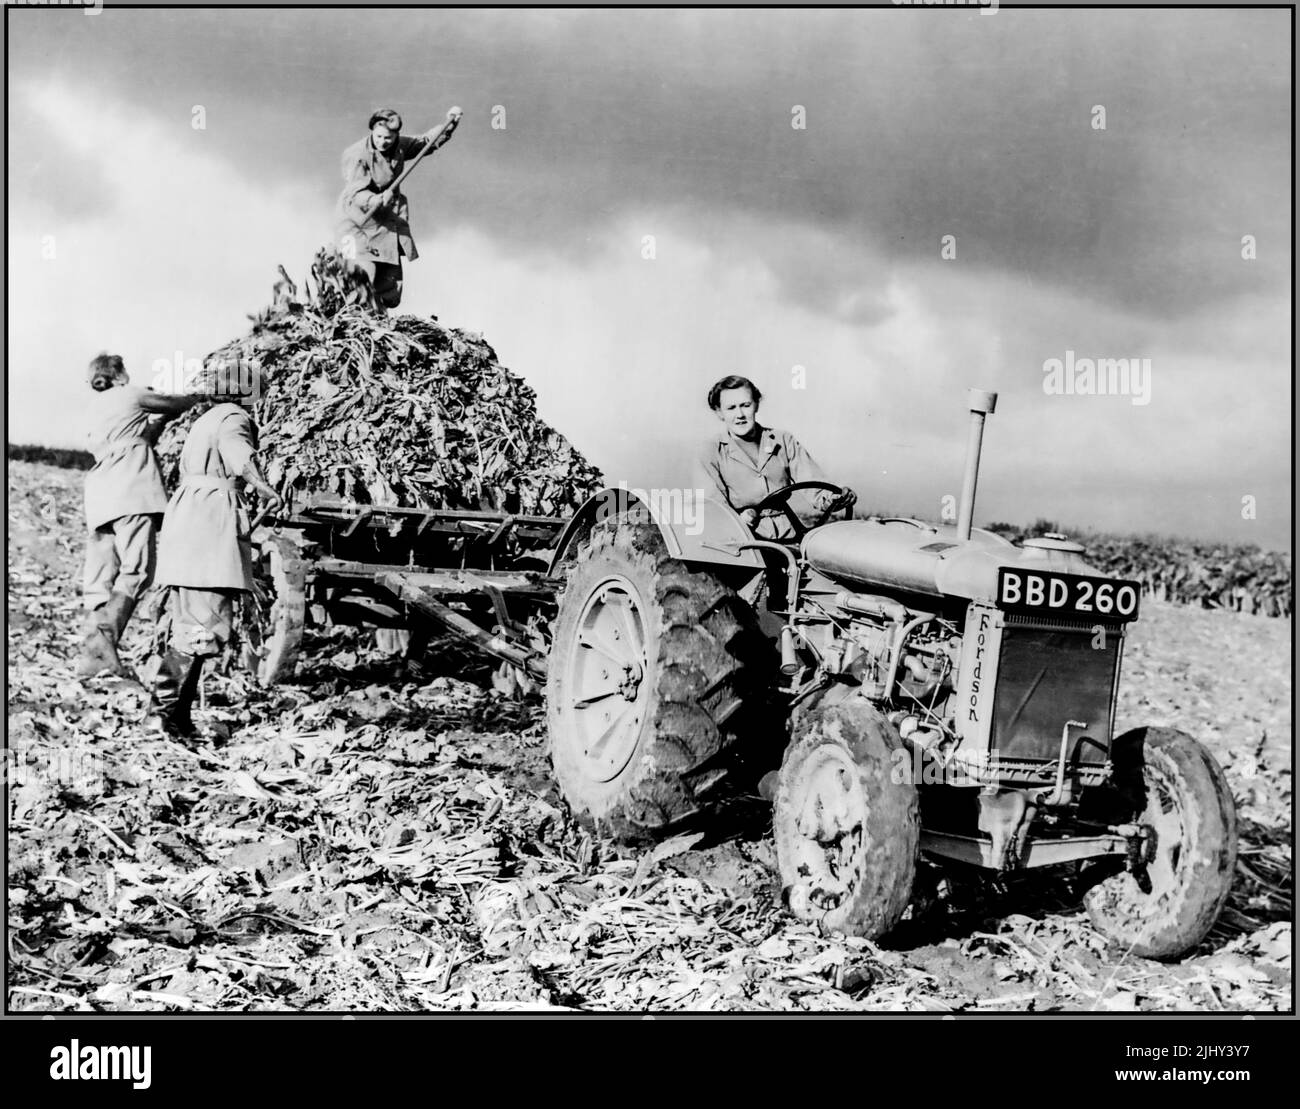 WW2 Women's Land Army British WLA harvesting beets propaganda image. A woman is driving a Fordson tractor in the foreground, while three others with pitchforks are loading the beetroots on the truck behind the tractor. Vital war work providing food for the UK  Second World War World War II WW2 Date circa 1943 Stock Photo